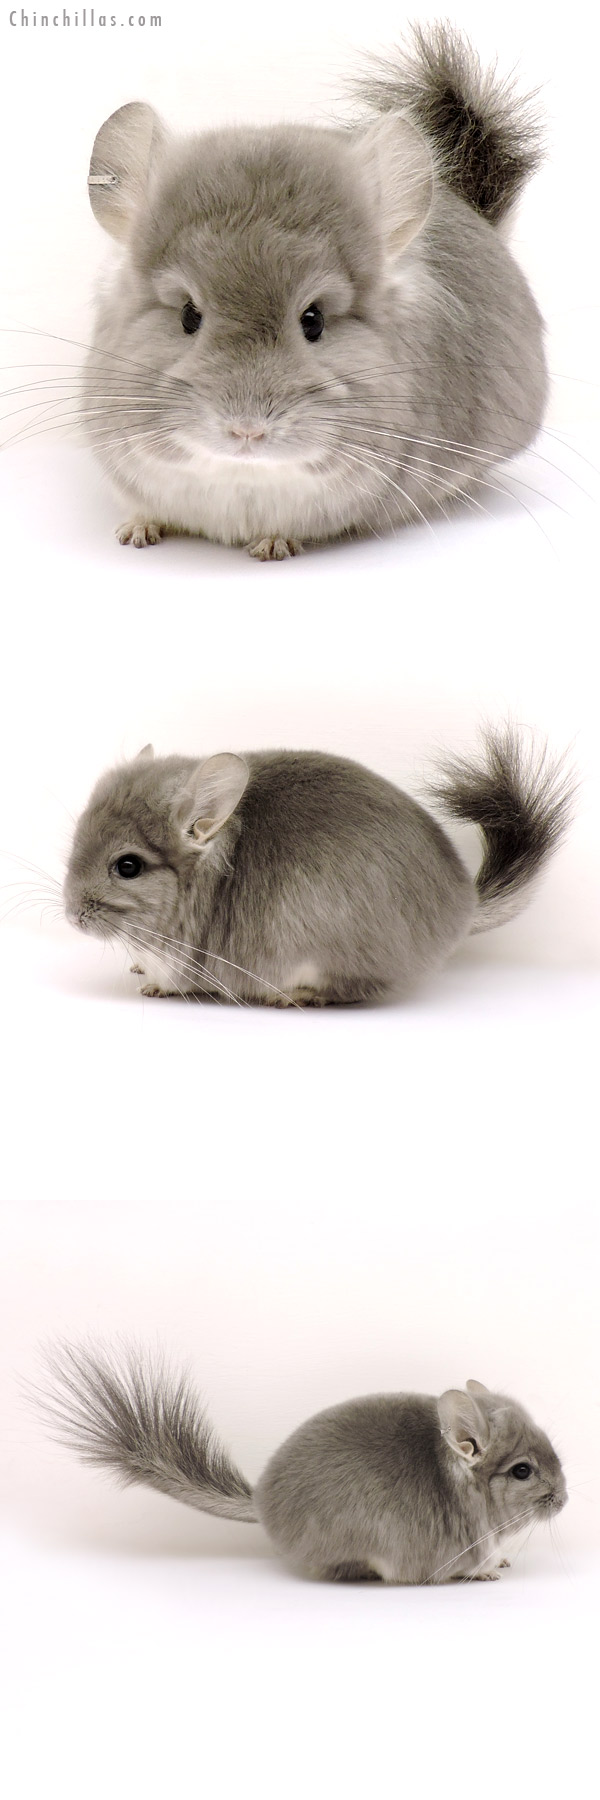 Chinchilla or related item offered for sale or export on Chinchillas.com - 14154 Exceptional Violet  Royal Persian Angora Male Chinchilla